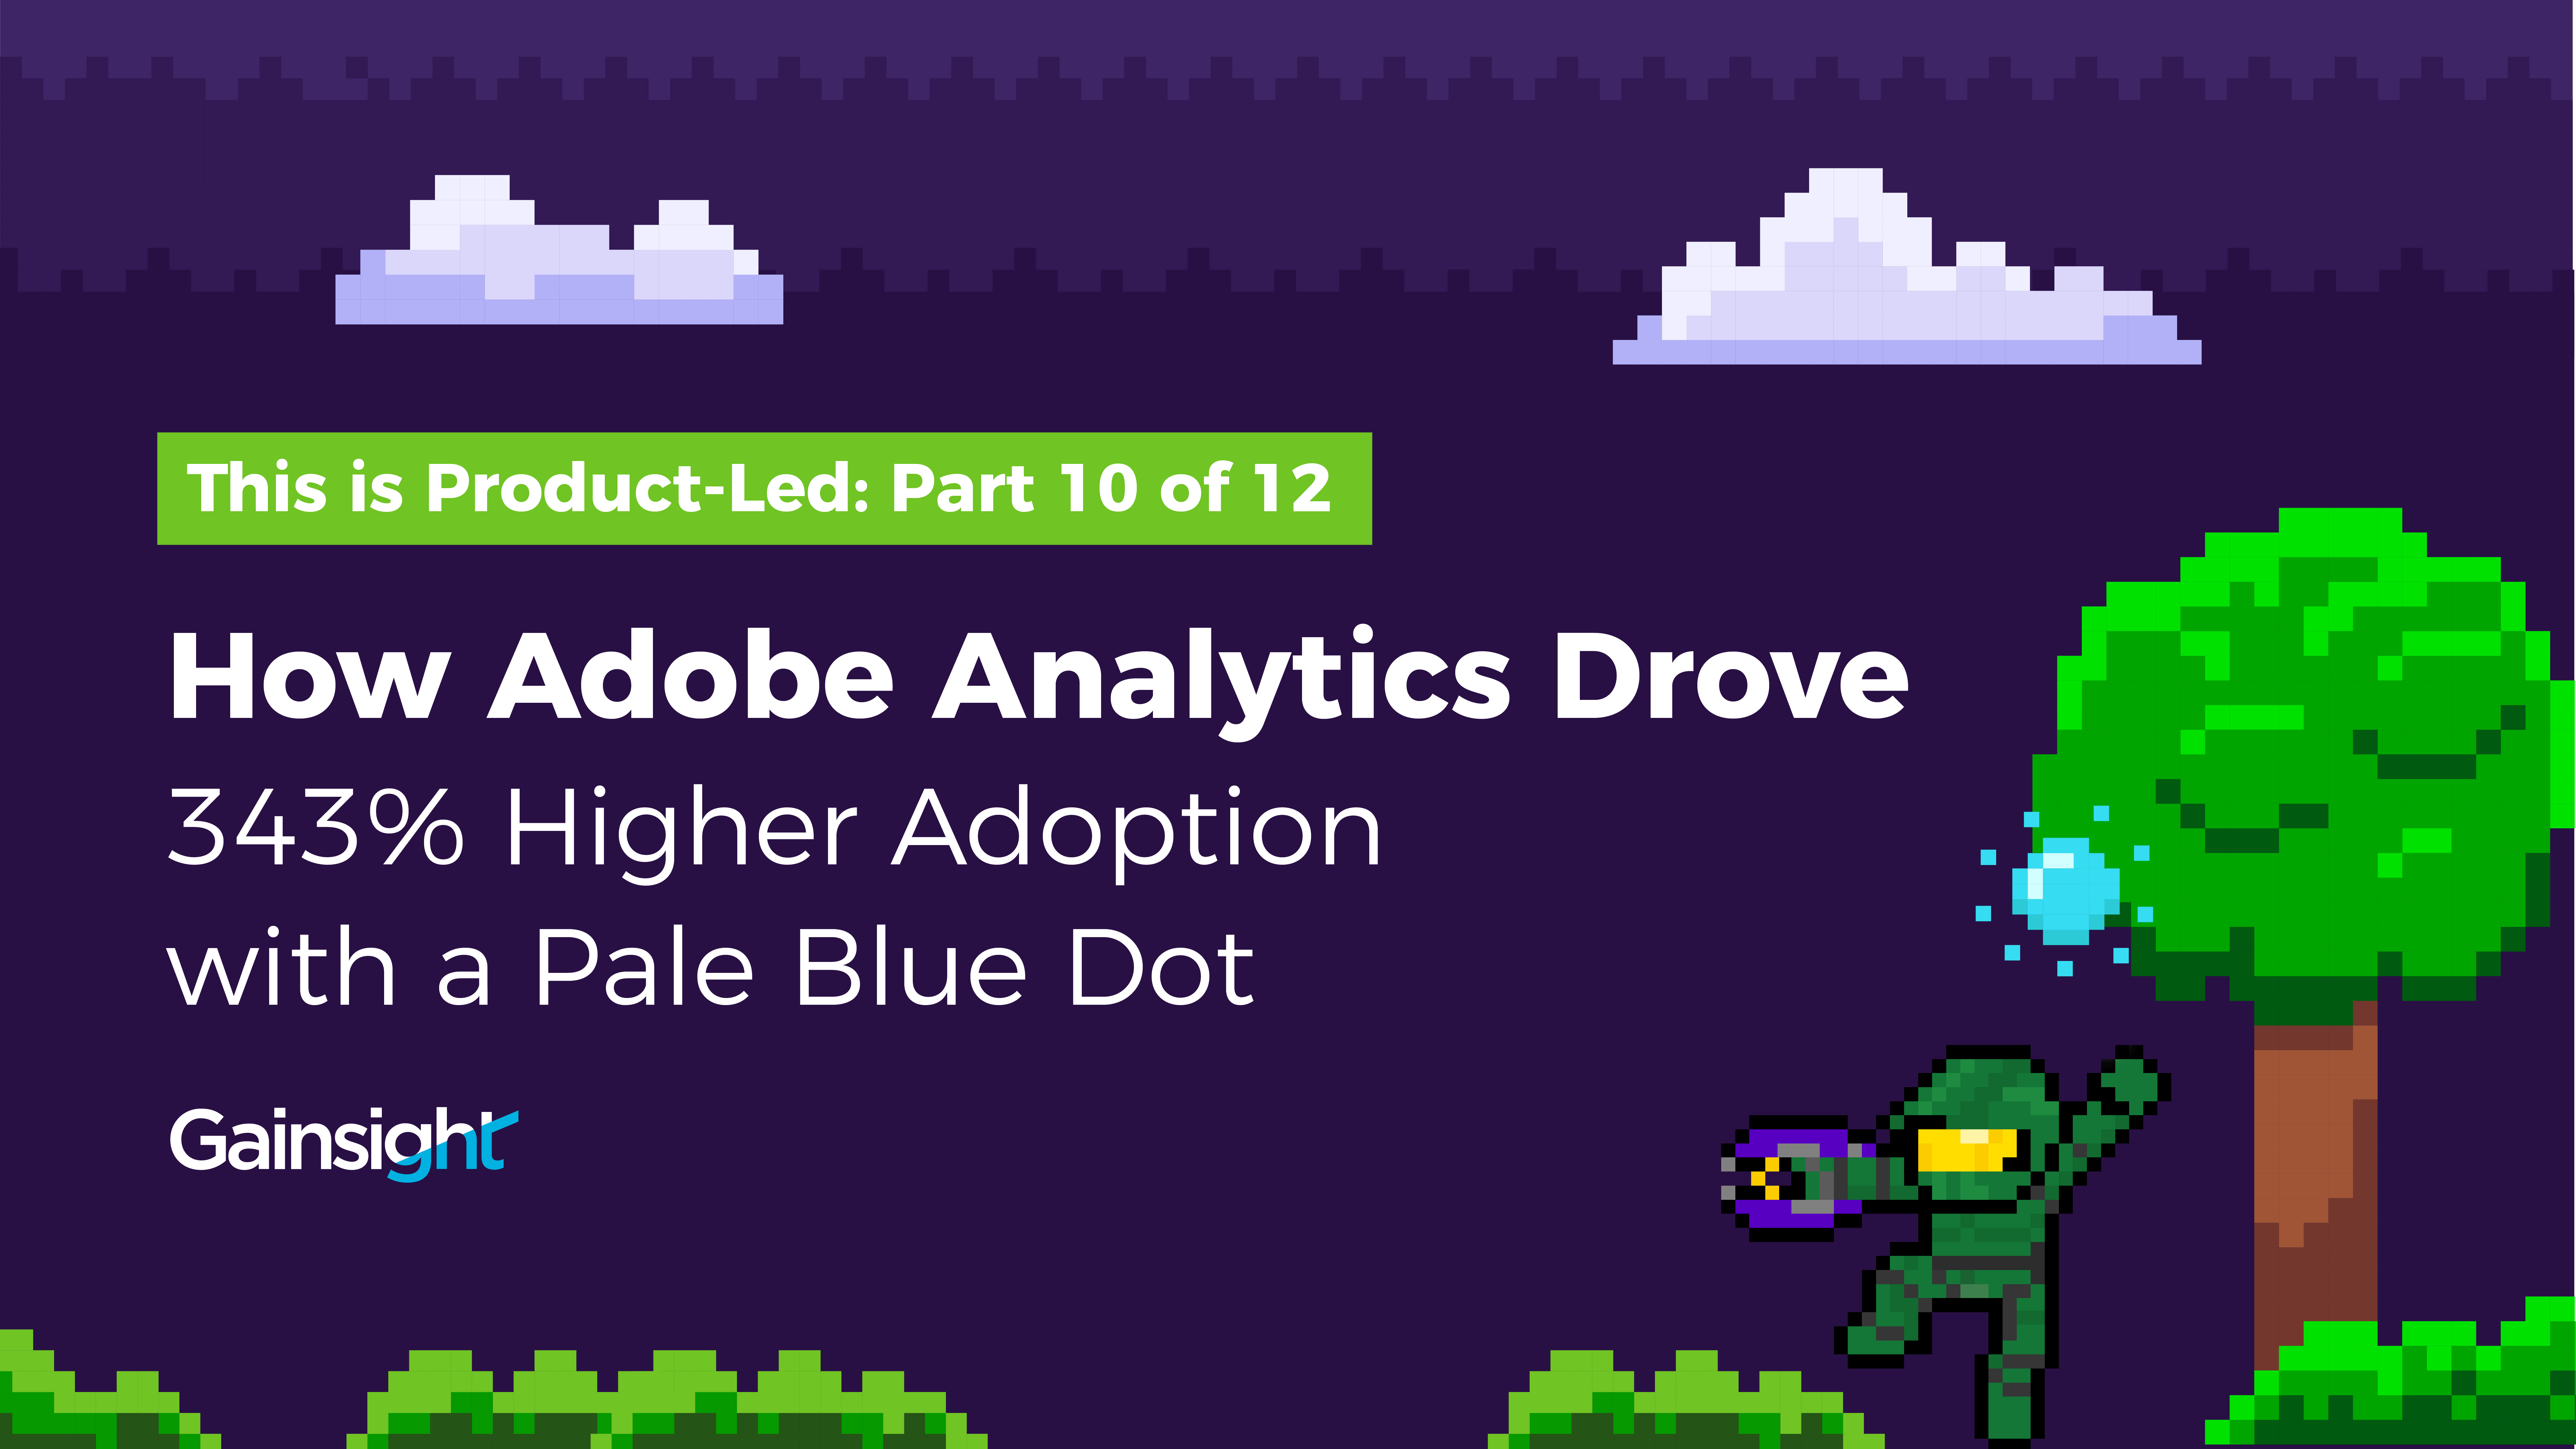 How Adobe Analytics Drove 343% Higher Adoption with a Pale Blue Dot Image